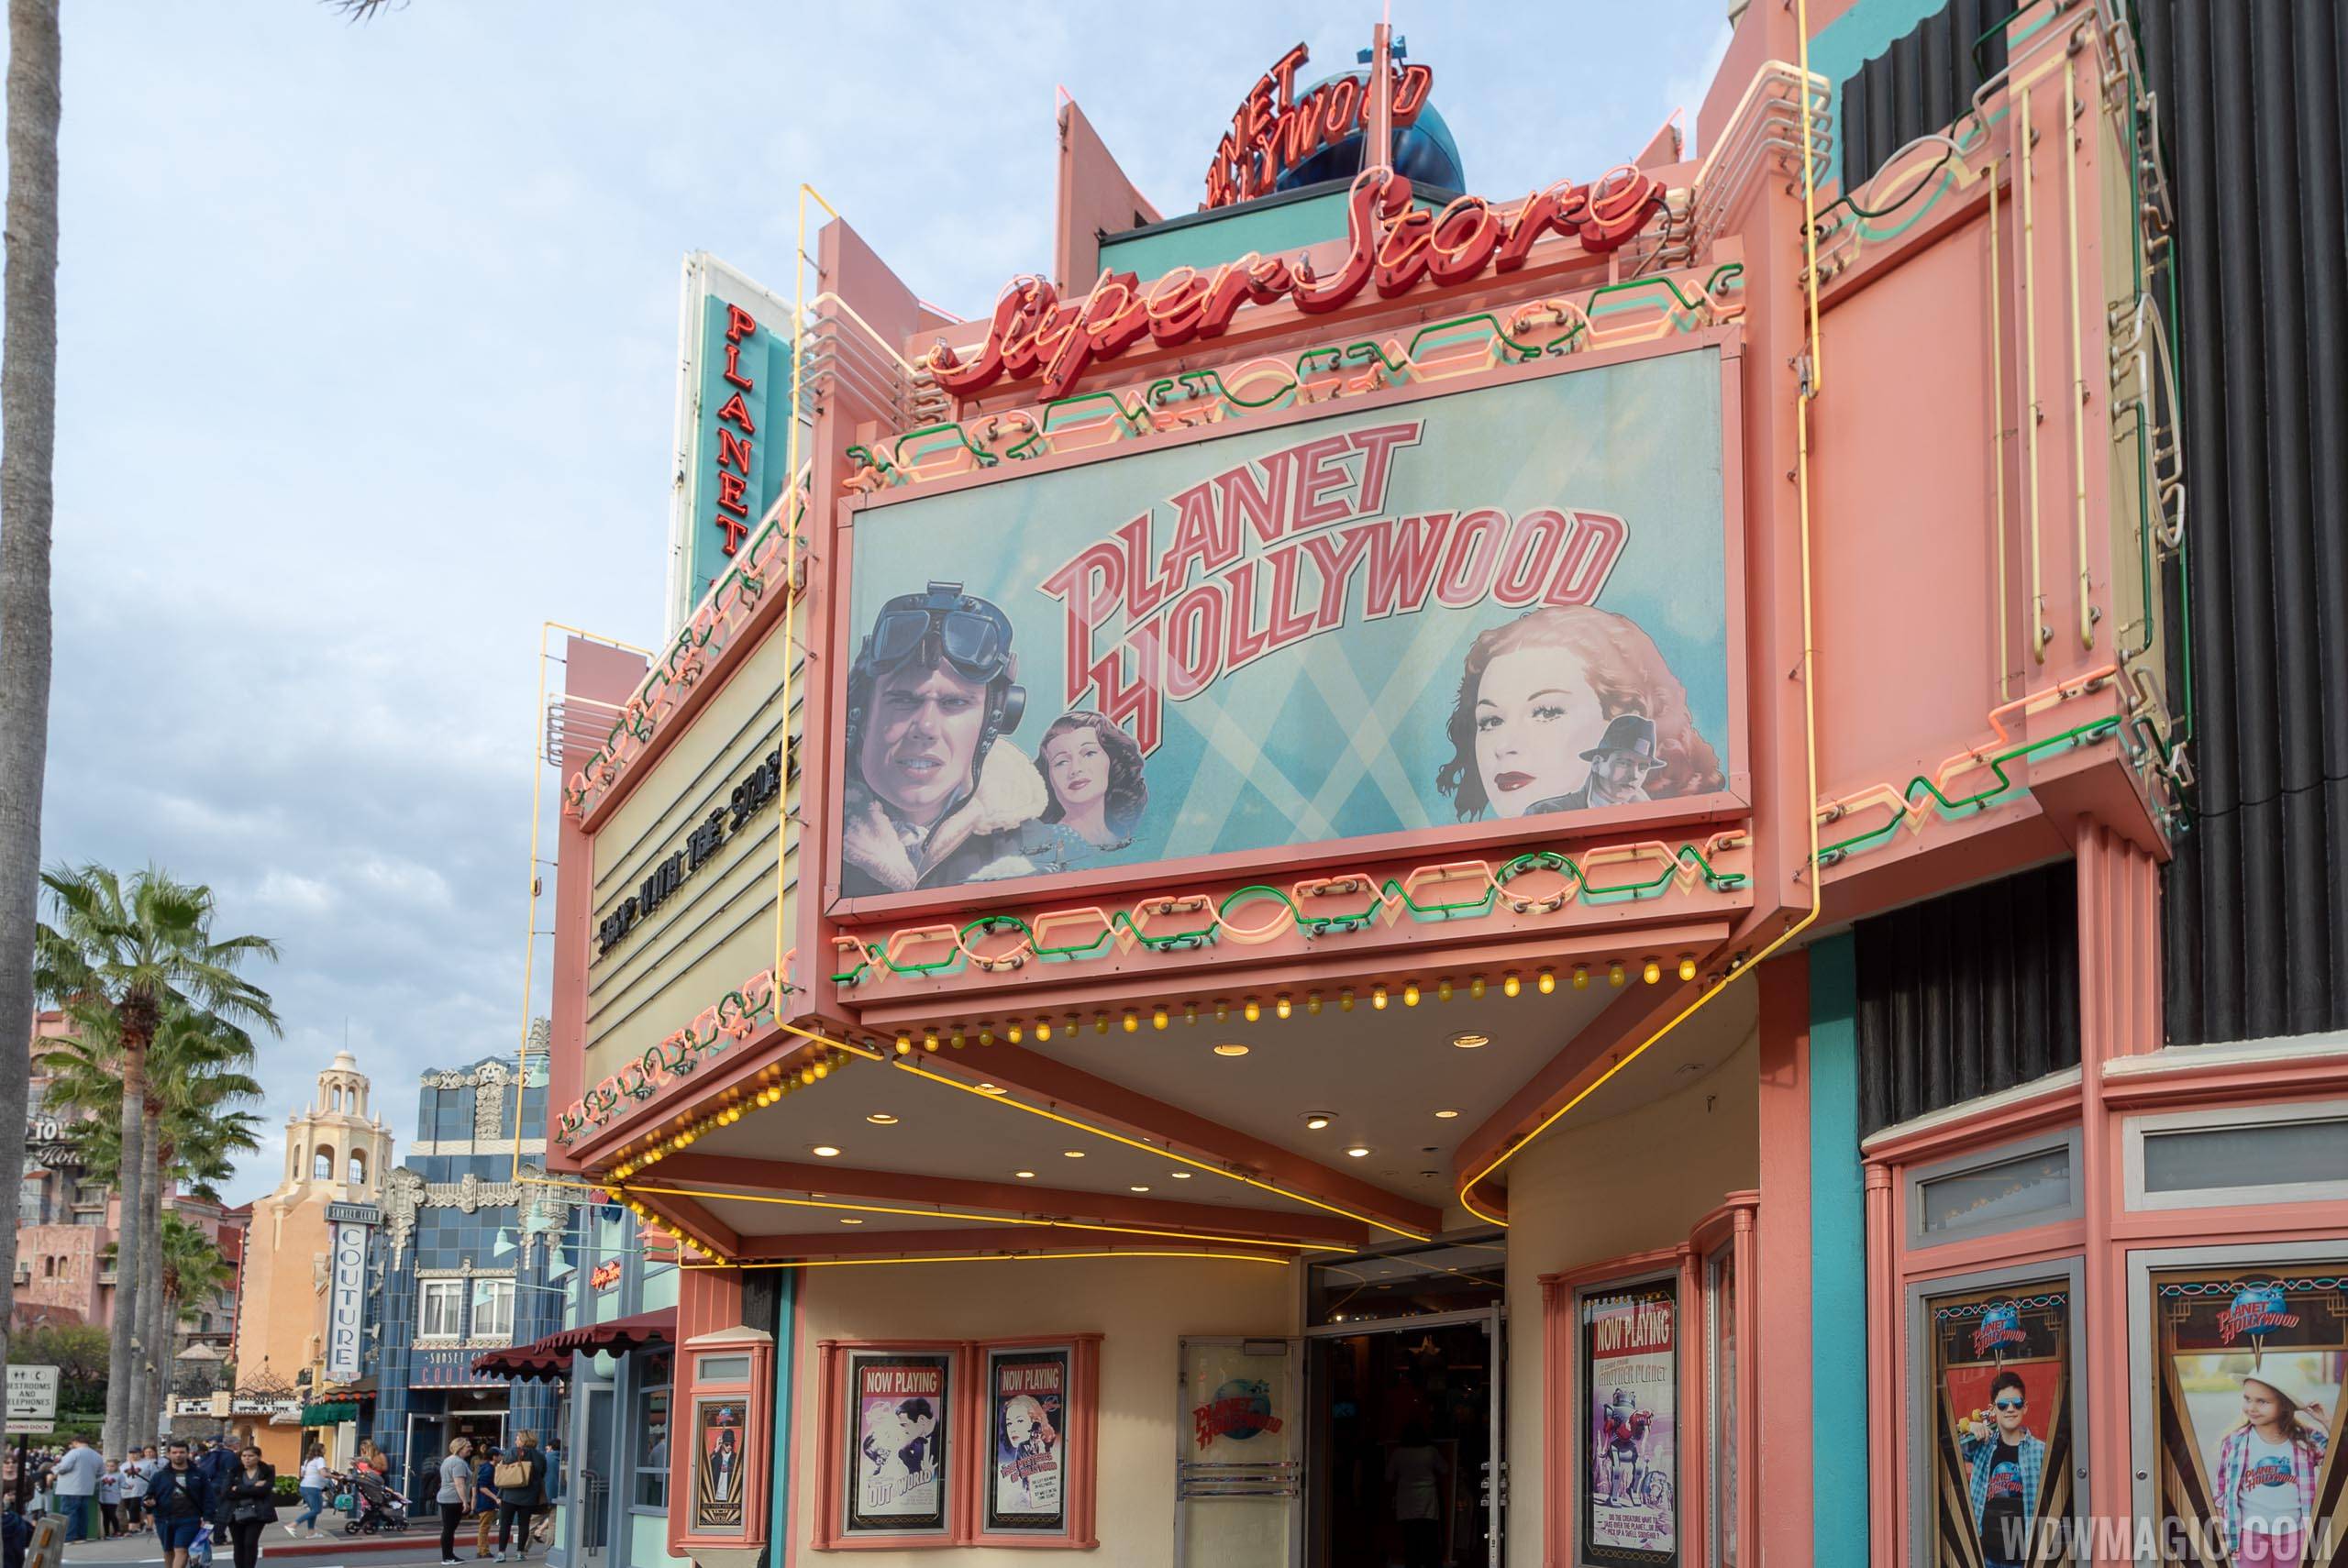 Planet Hollywood Super Store to close at Disney's Hollywood Studios